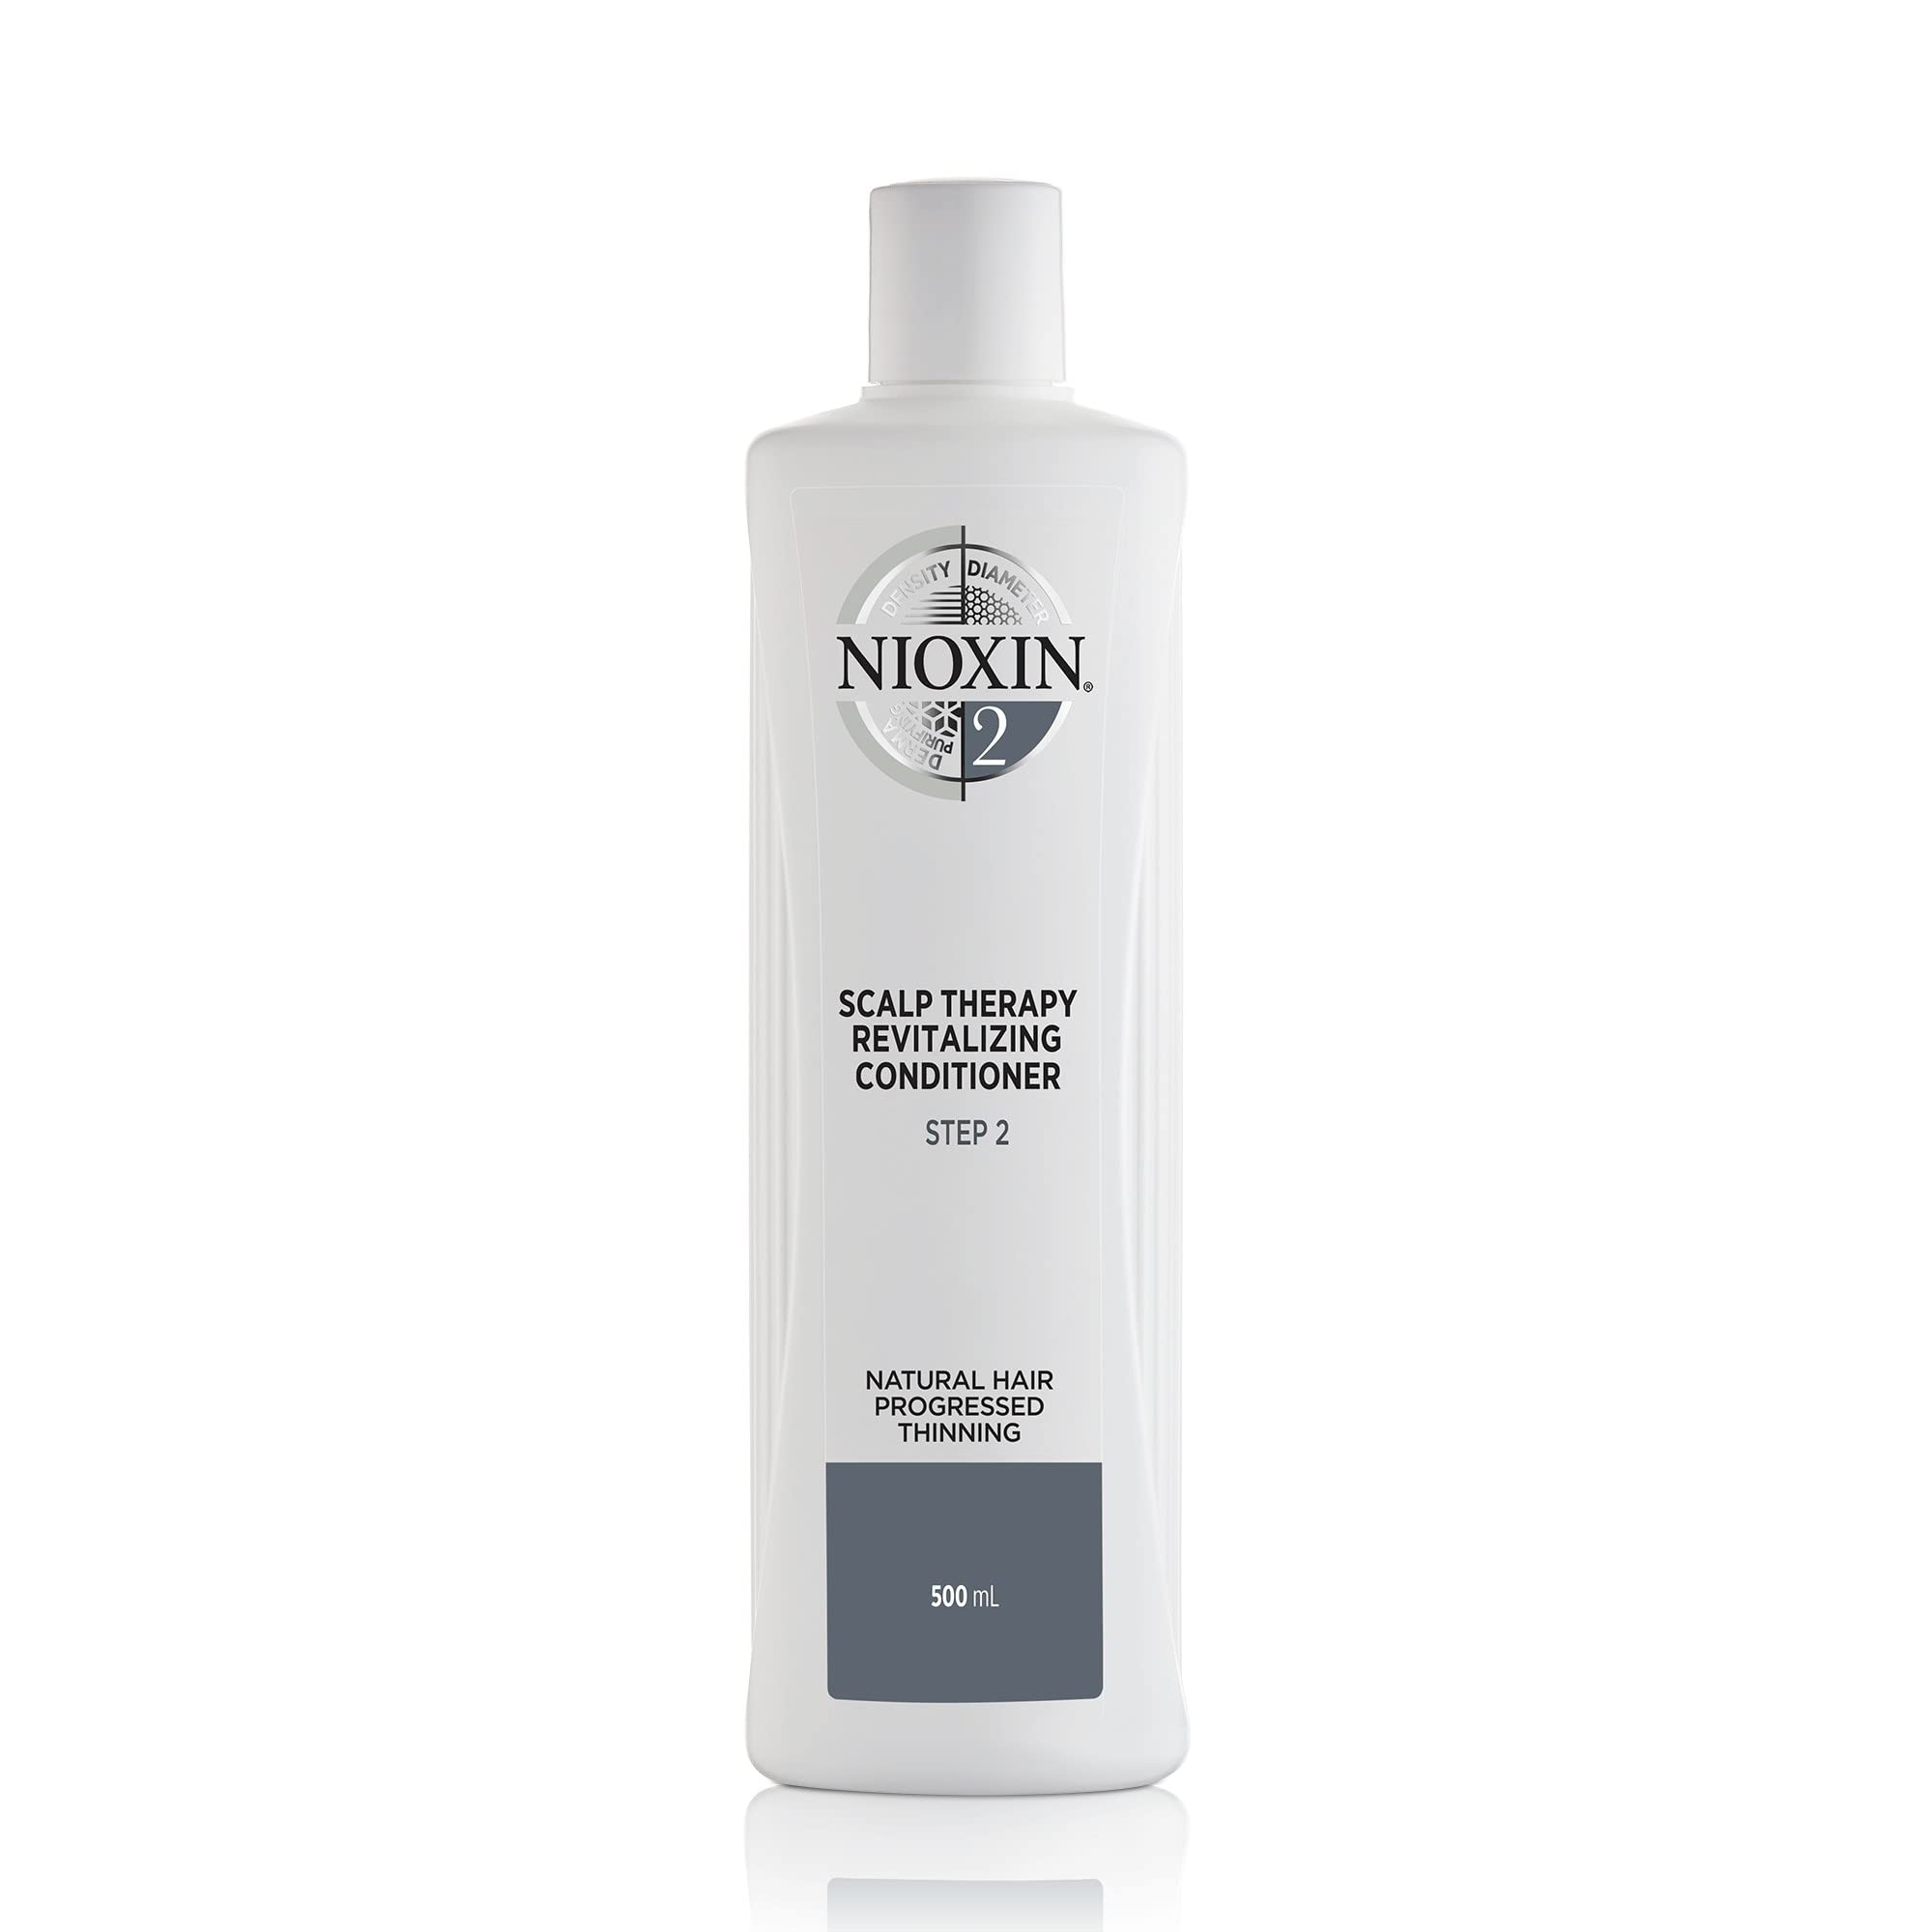 Nioxin System 2, Therapy Conditioner With Peppermint Oil, Treats Sensitive Scalp & Provides Moisture, For Natural Hair with Progressed Thinning, Various Sizes